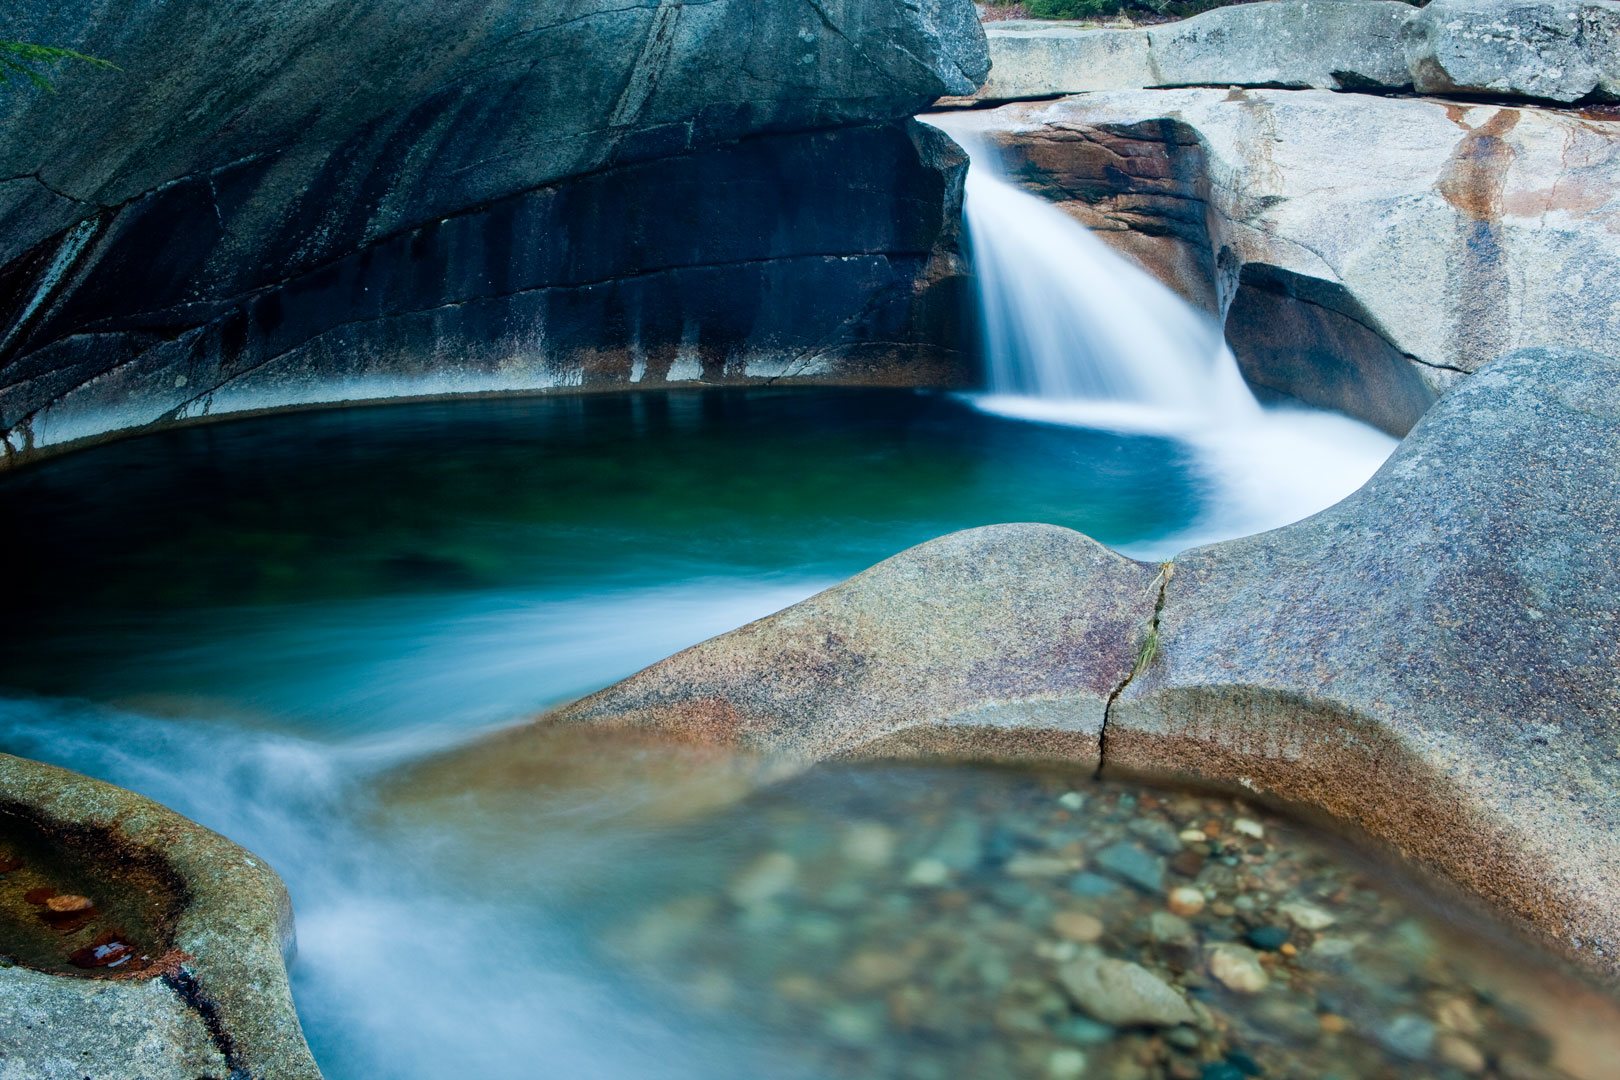 The Basin in Franconia Notch State Park, New Hampshire, is an easily accessible tourist spot about one-half mile from the A.T. Photo by Jerry Monkman, ecophotography.com